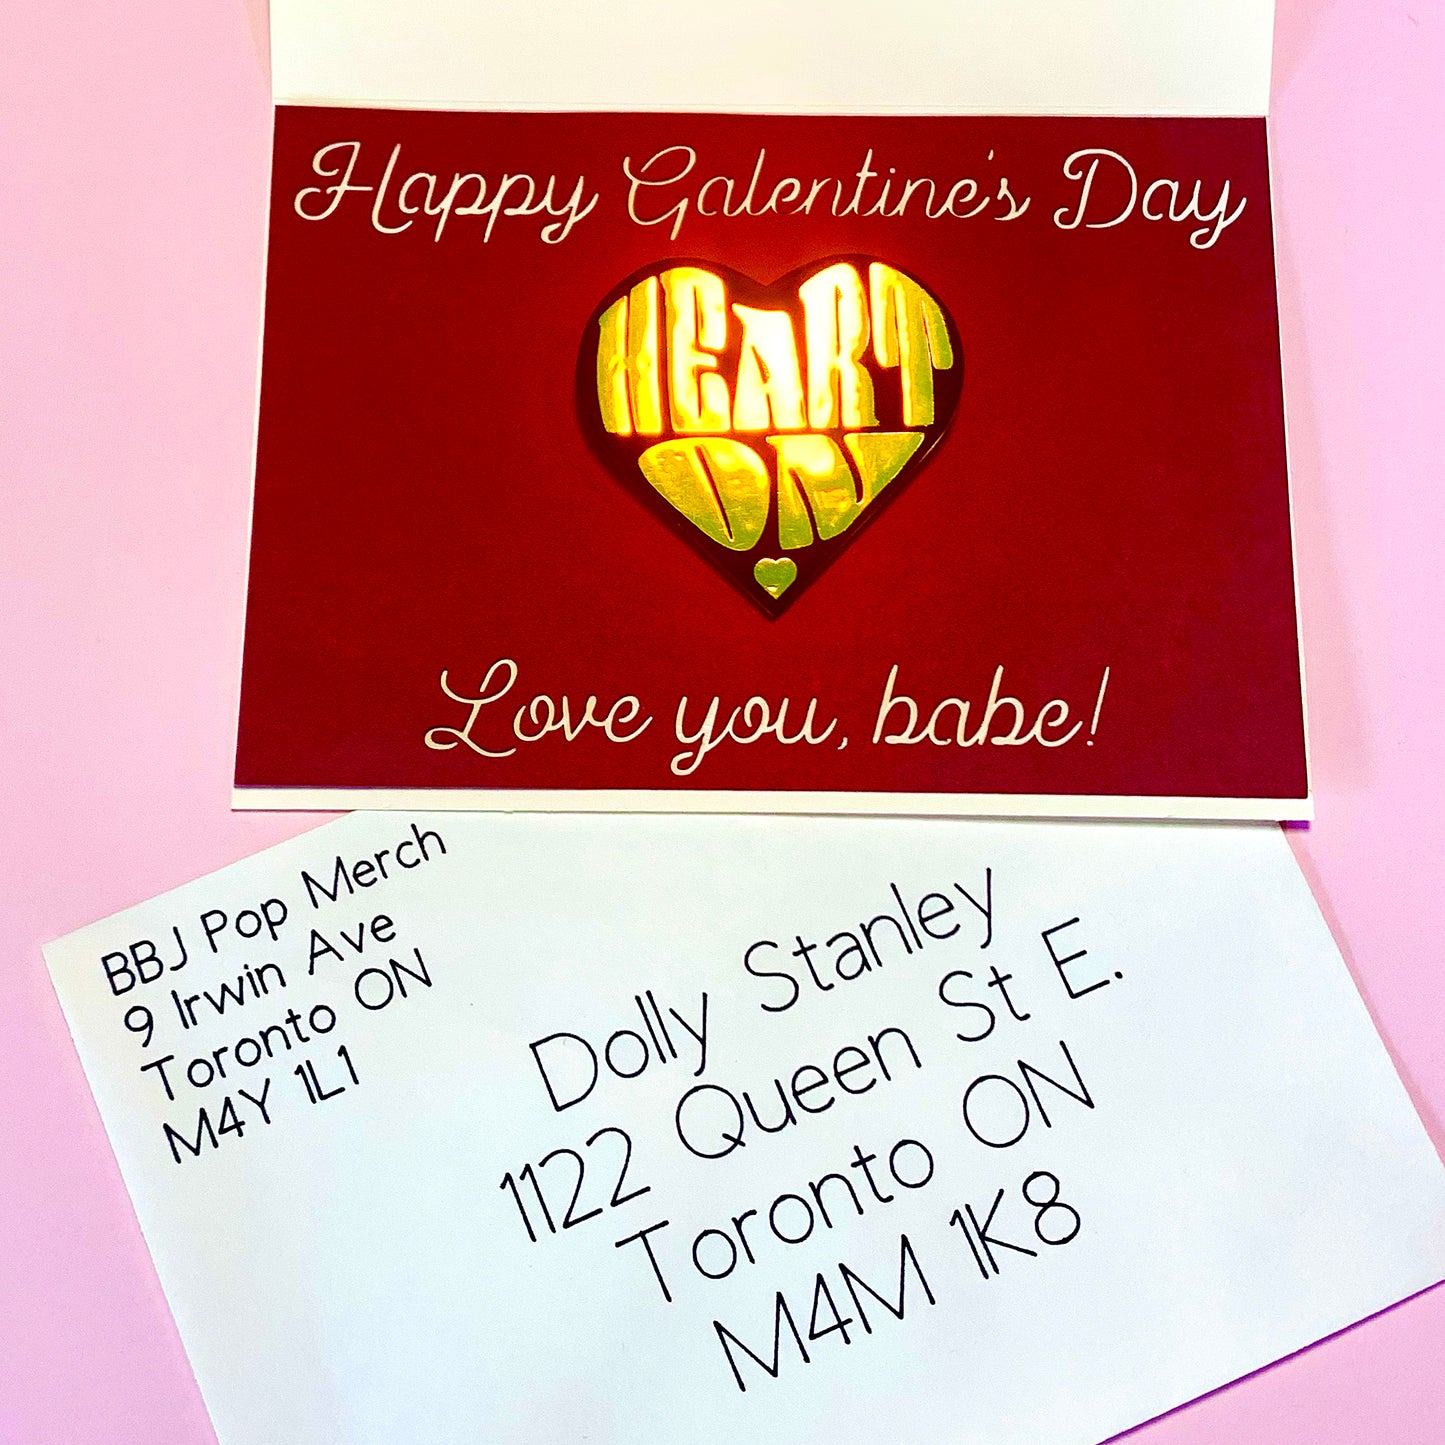 "Heart On" heart-shaped pin - holo gold & black option, packaged with personal message "Happy Galentine's Day, Love you, babe!" cut in deep red & cream card, envelope set